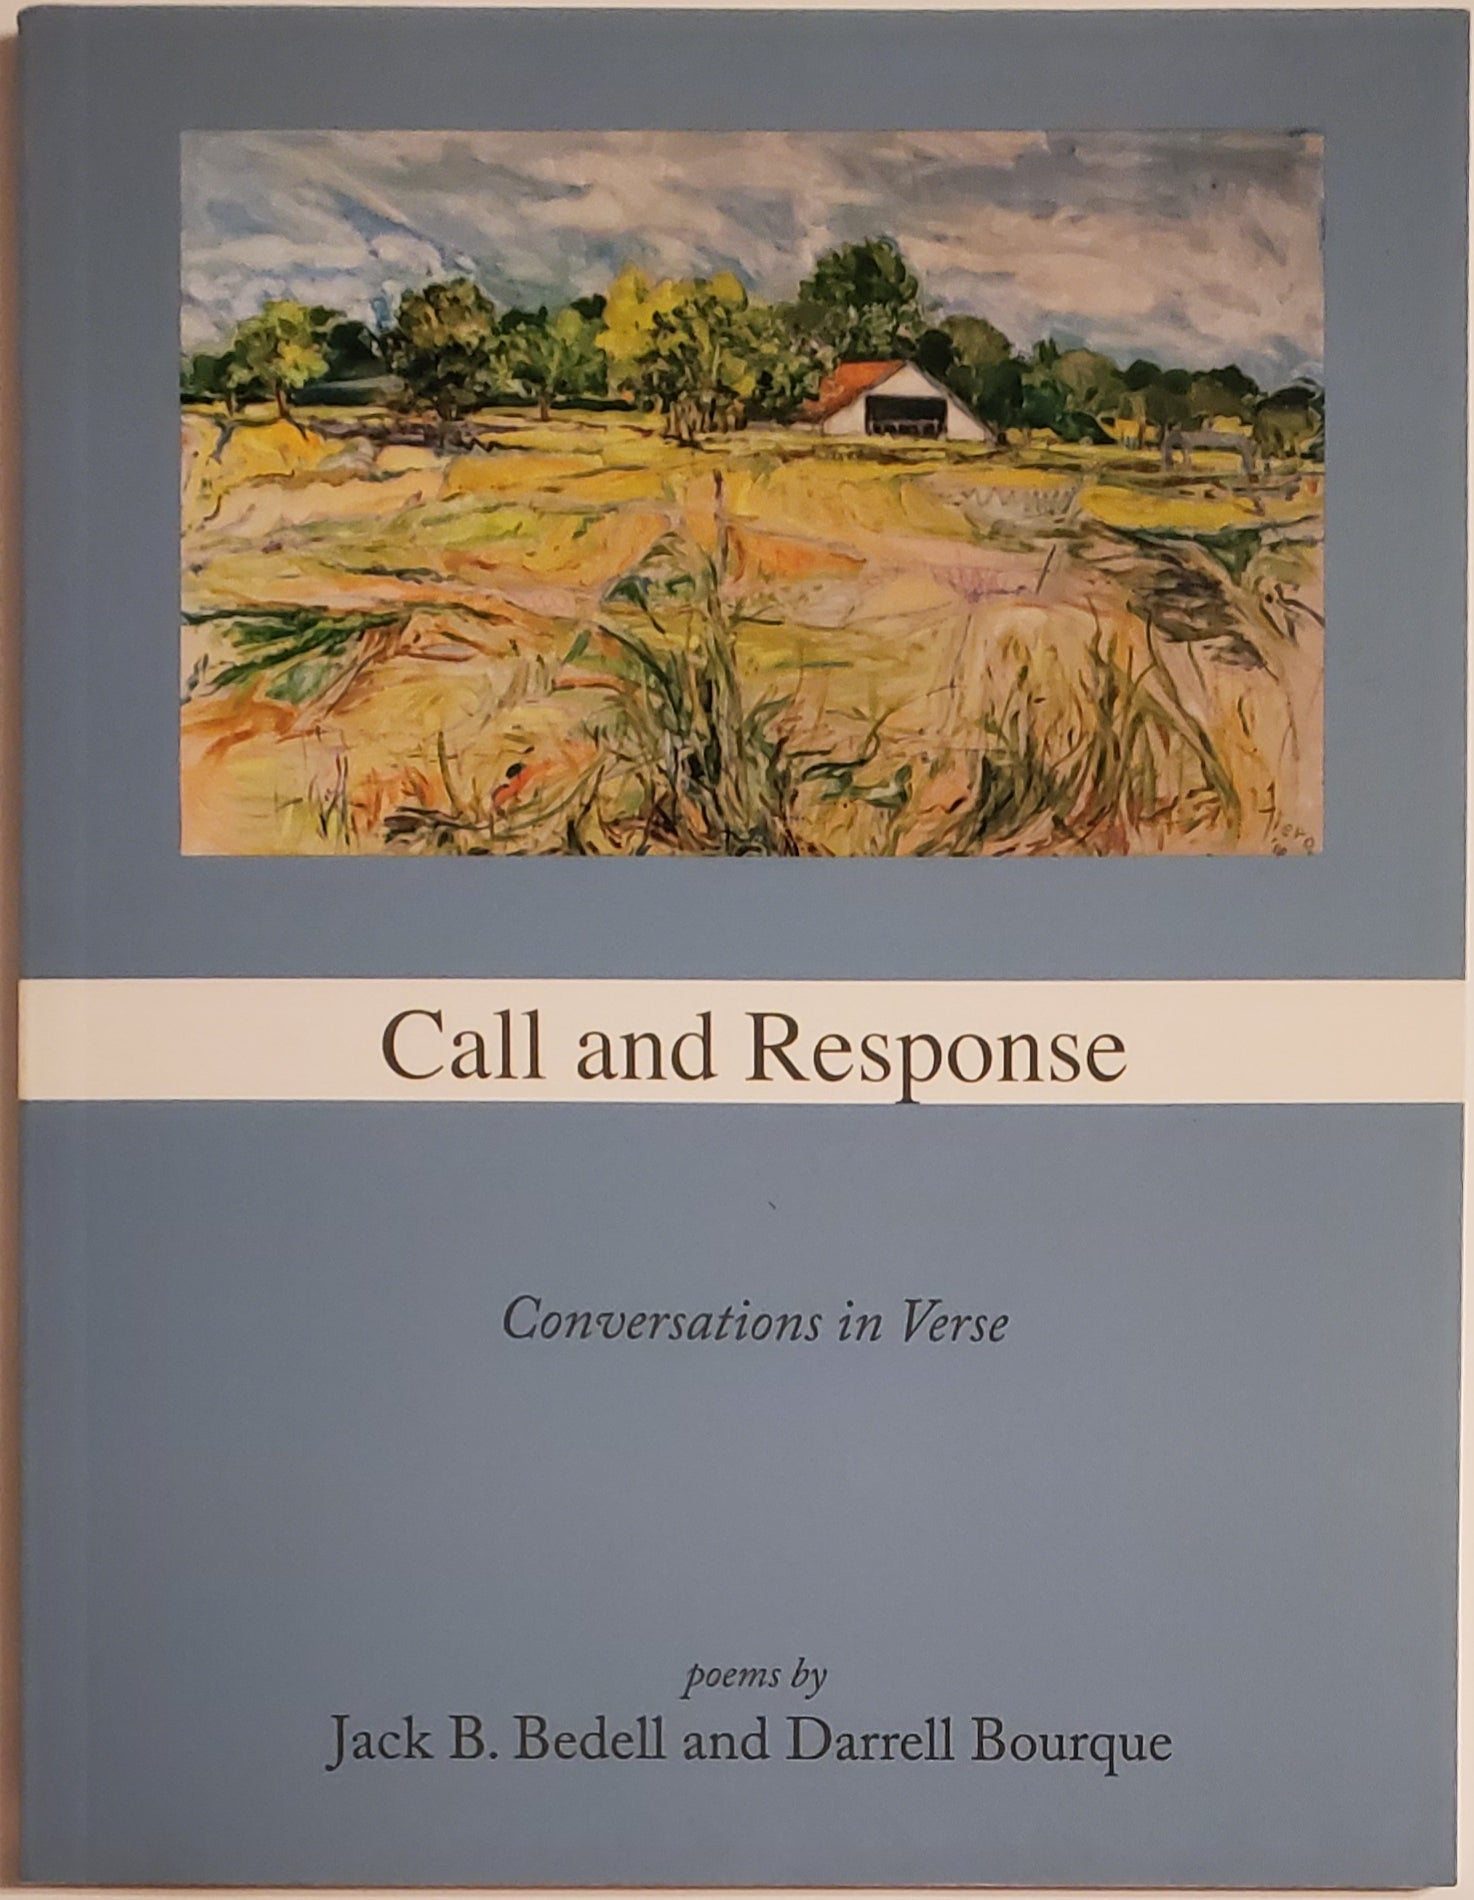 [Book #29251] CALL AND RESPONSE. Conversations in Verse. Jack B. Bedell, Darrell Bourque.